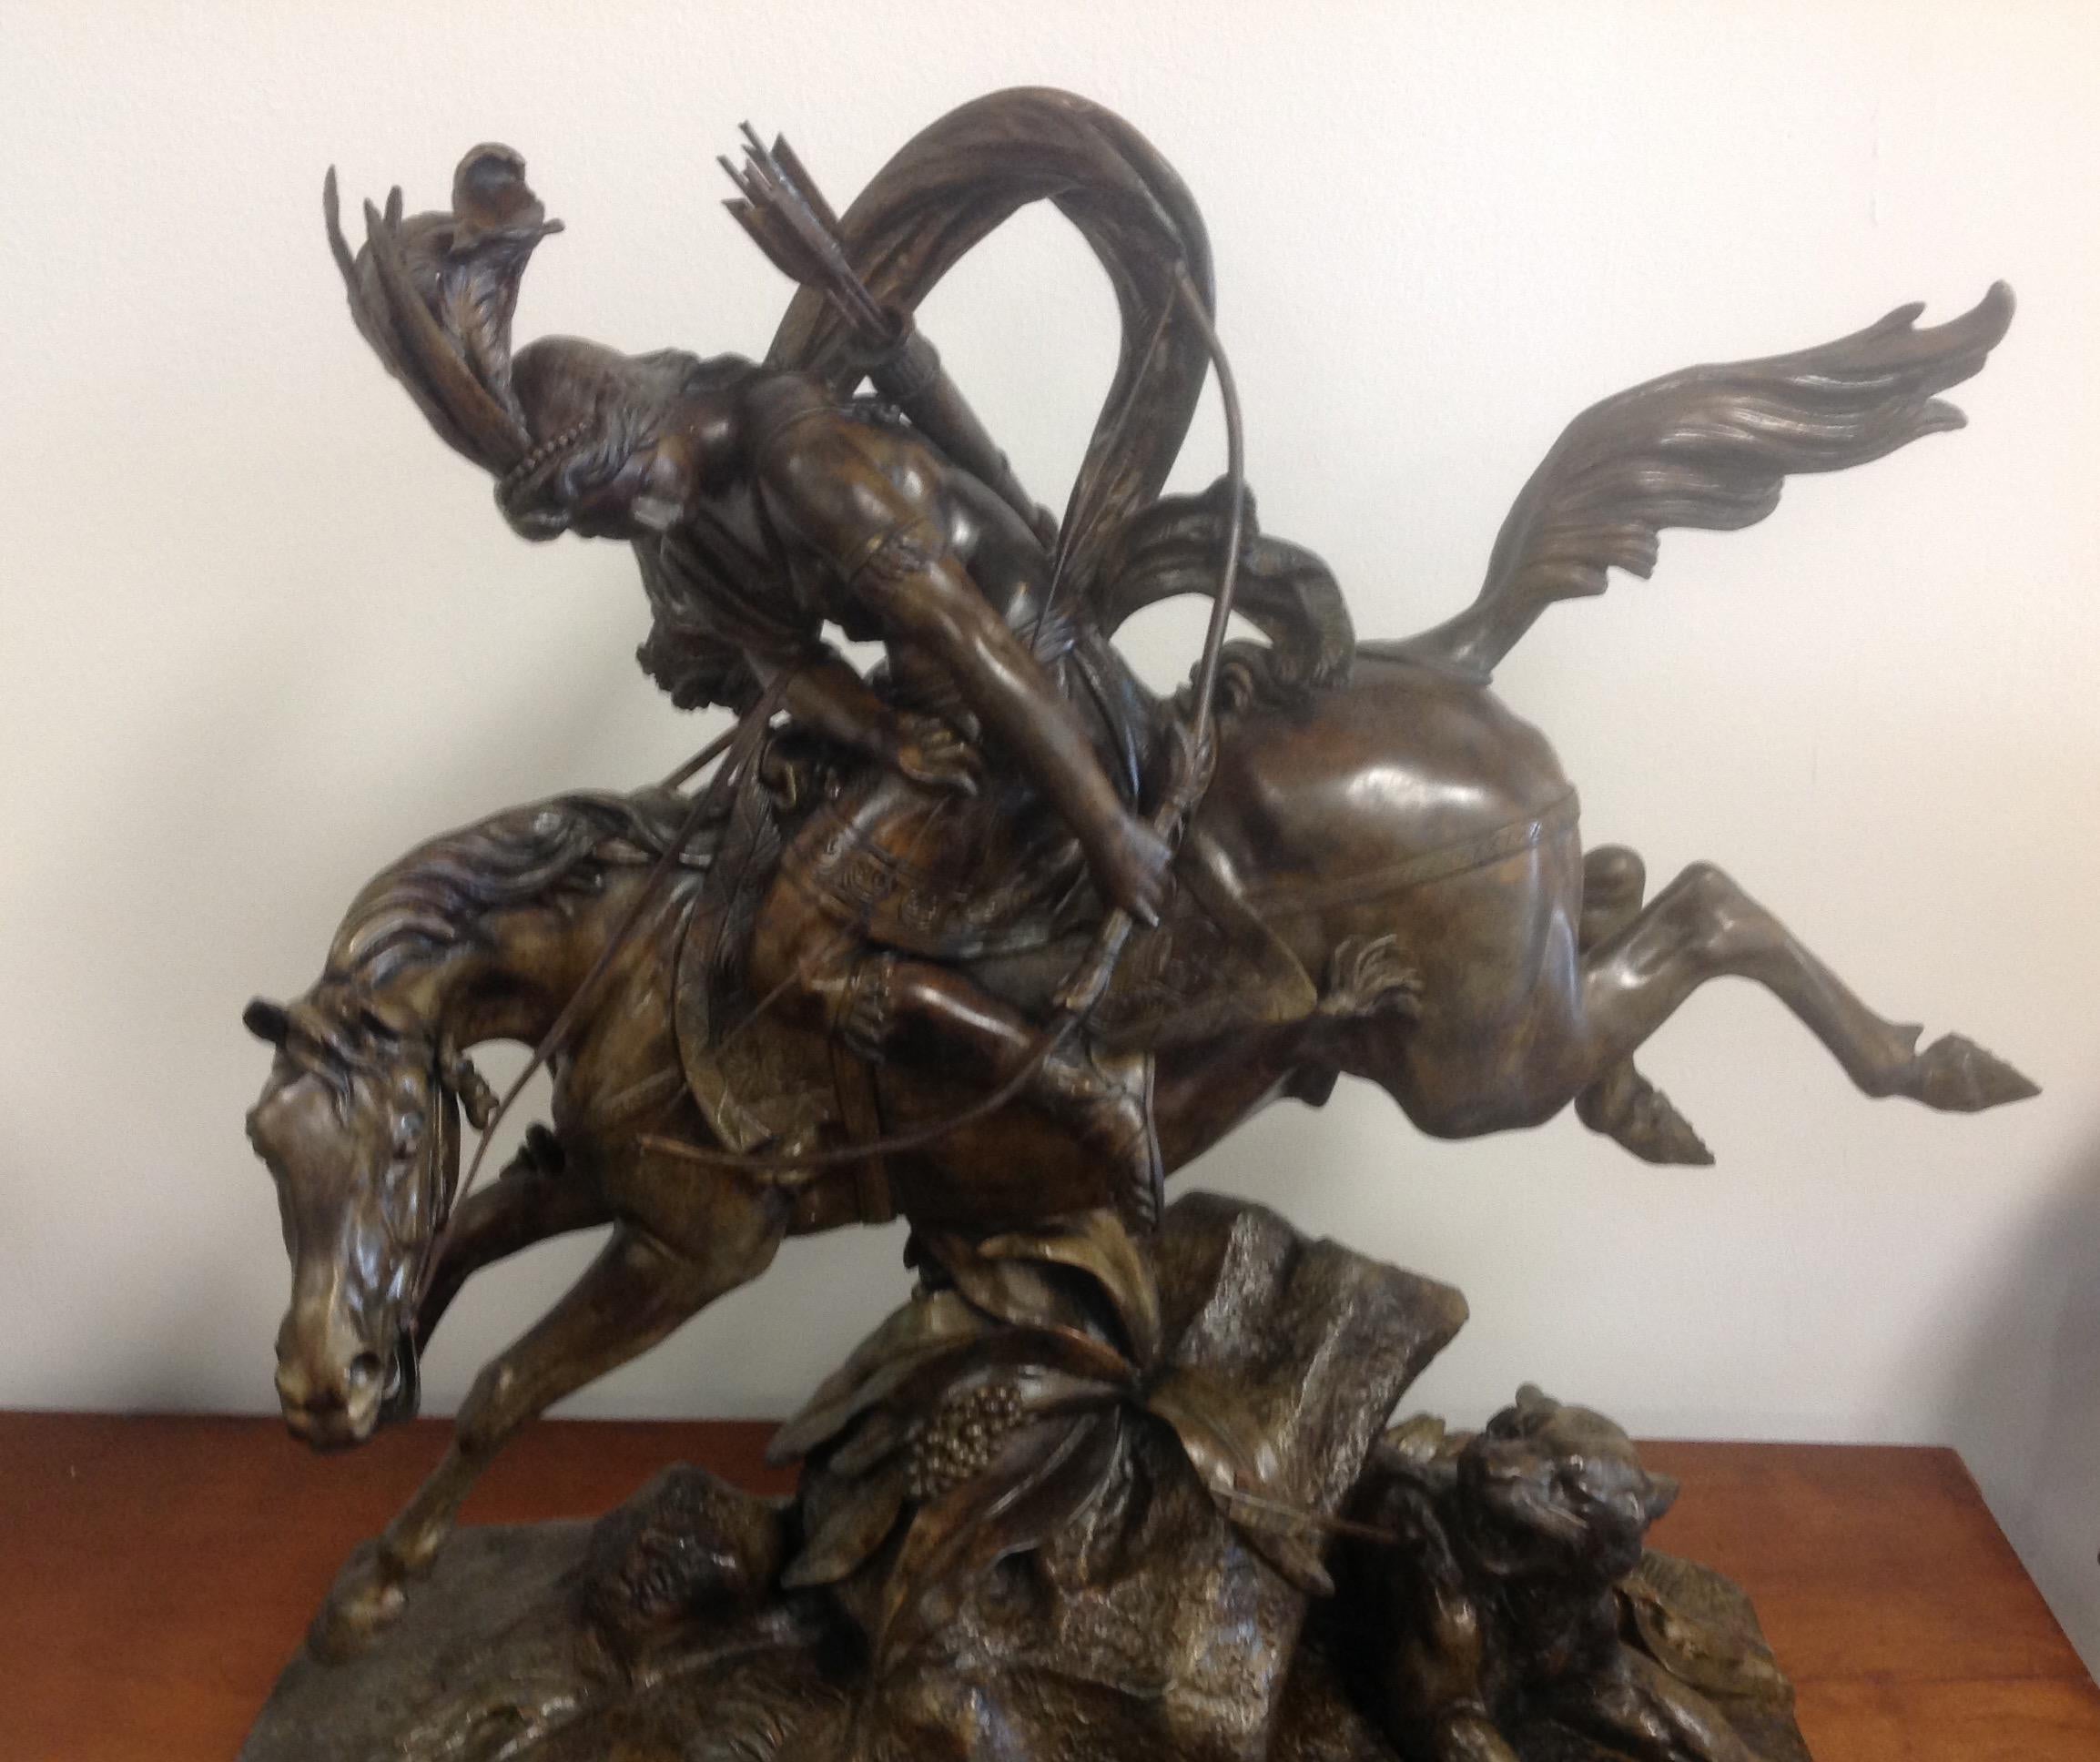 Amazing bronze group sculpture by Theodore Gechter. Unsurpassed quality and detail. Please see all pictures.